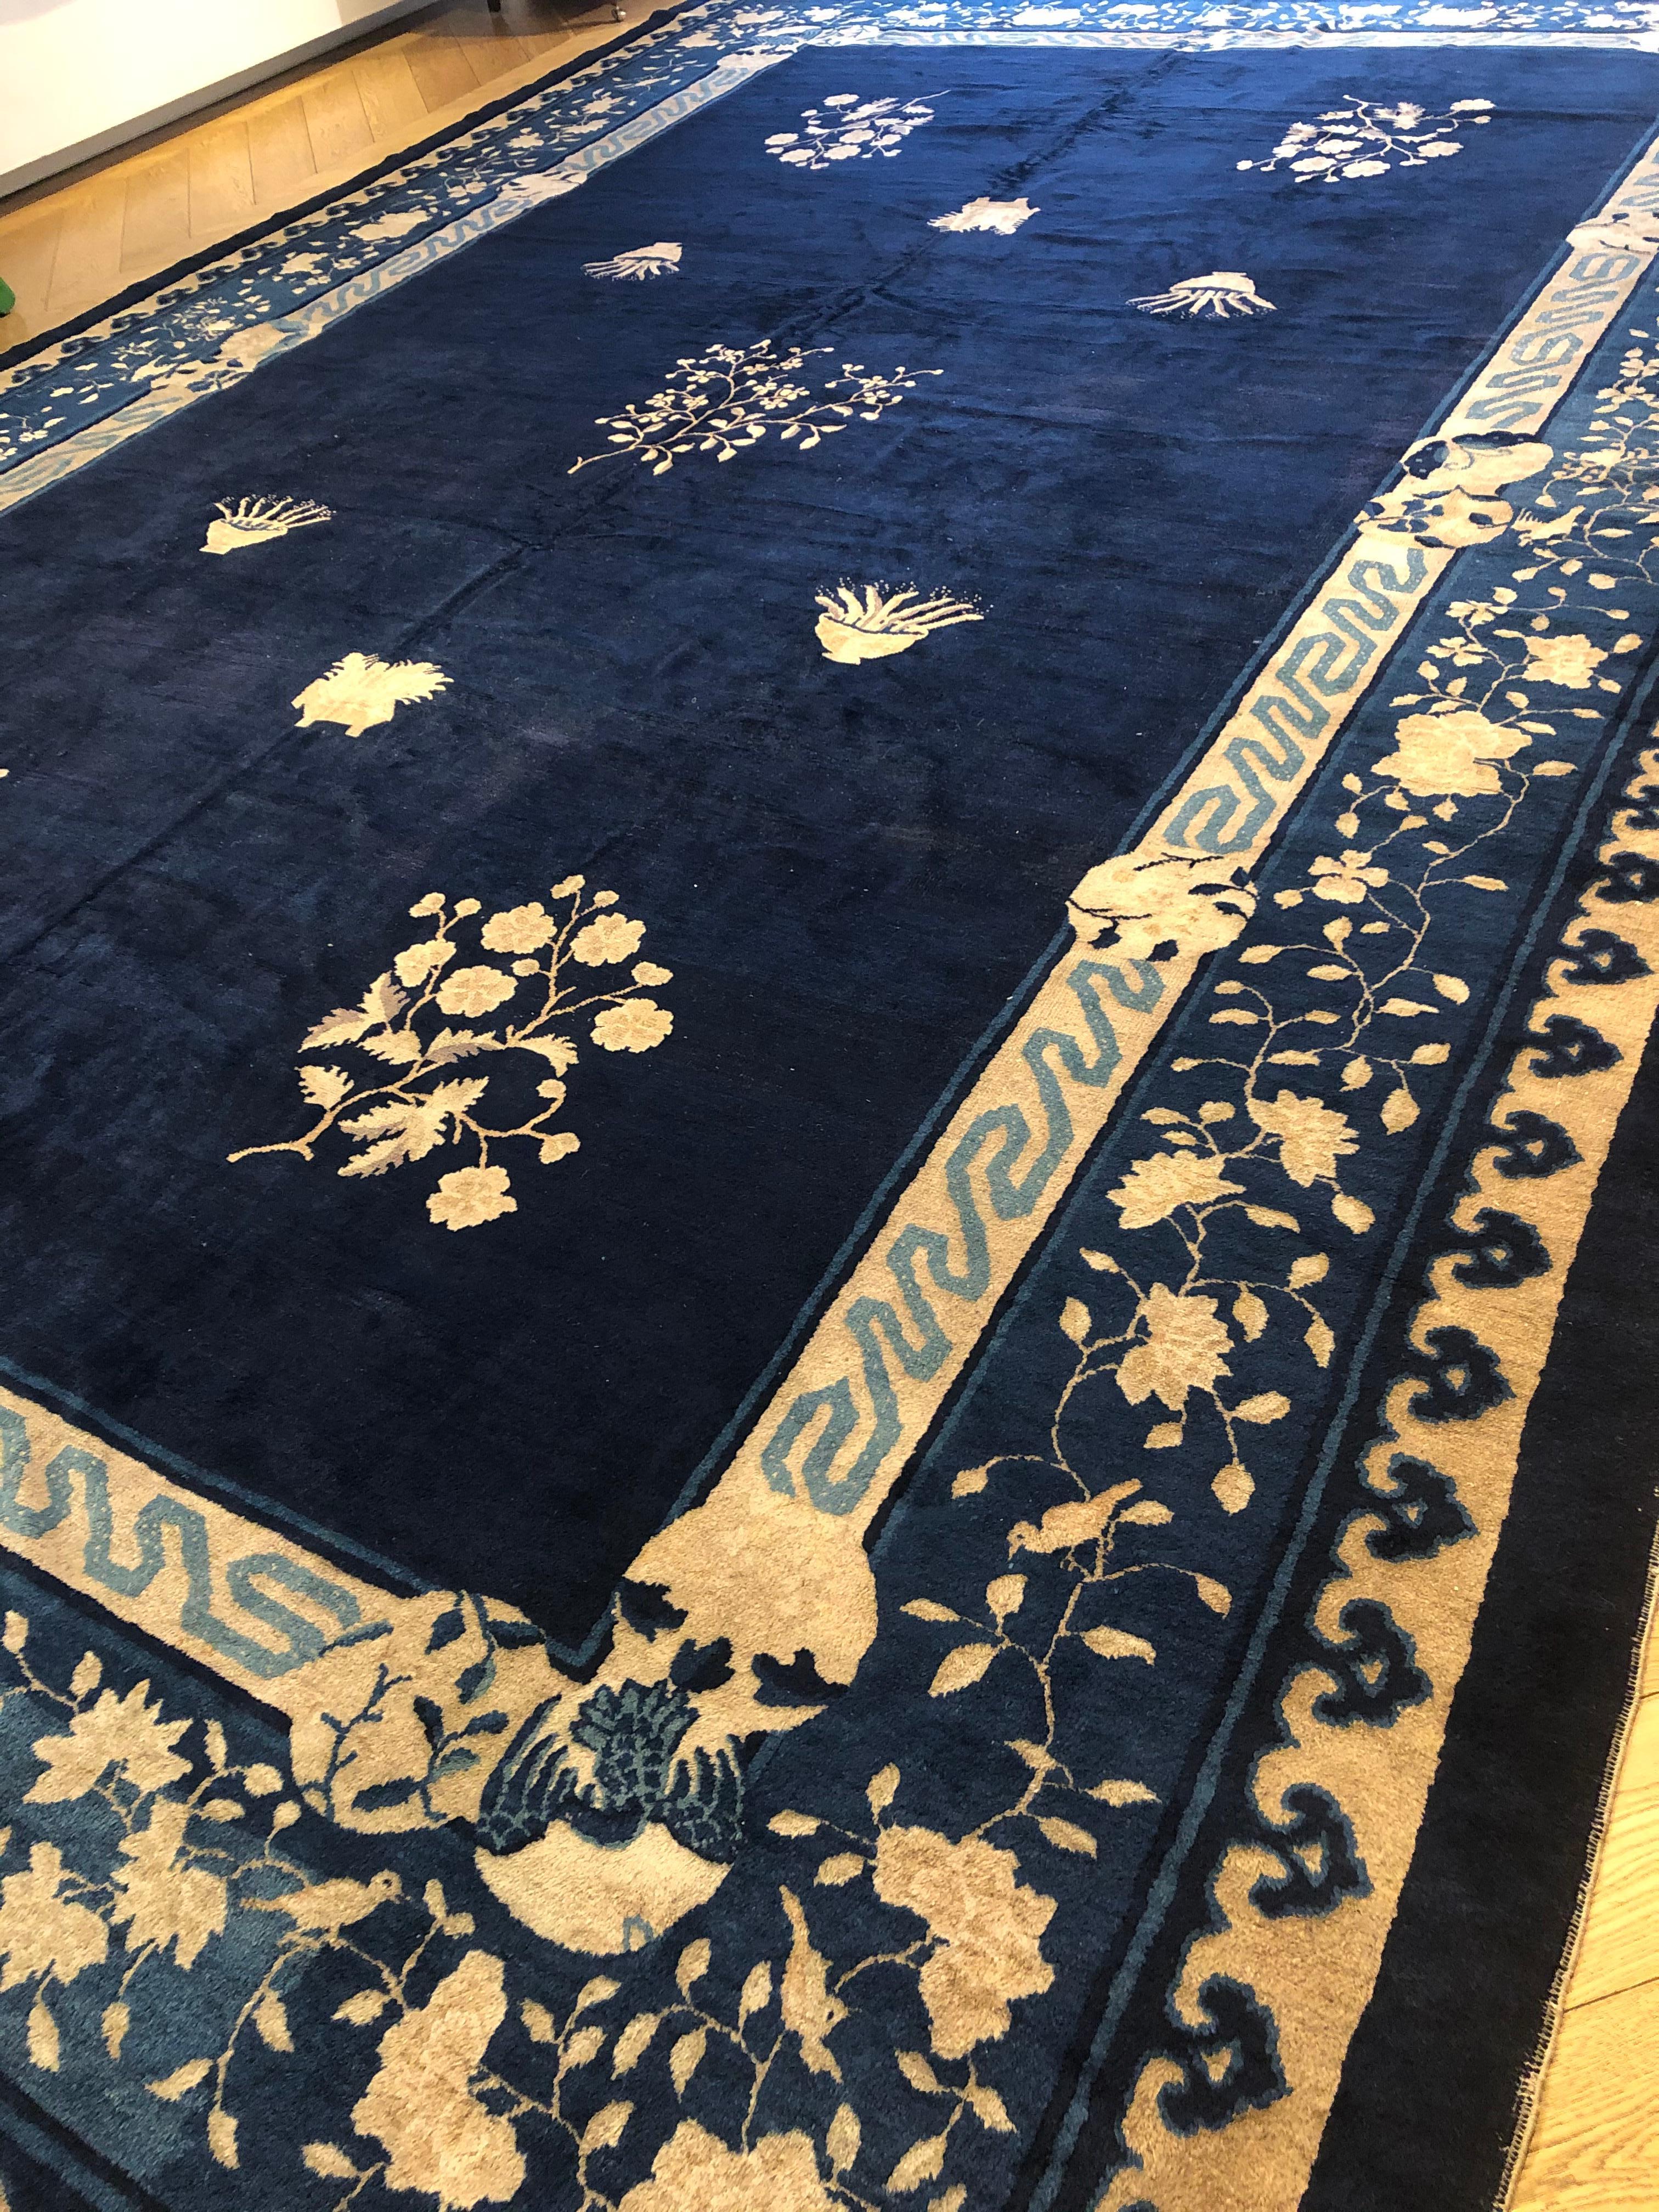 The Chinese garden in a carpet: the decorative layout of this 19th century carpet expresses the harmony given by the shapes of the plants and flowers in their pots. The Chinese garden brings together elements of a fauna character with architectural